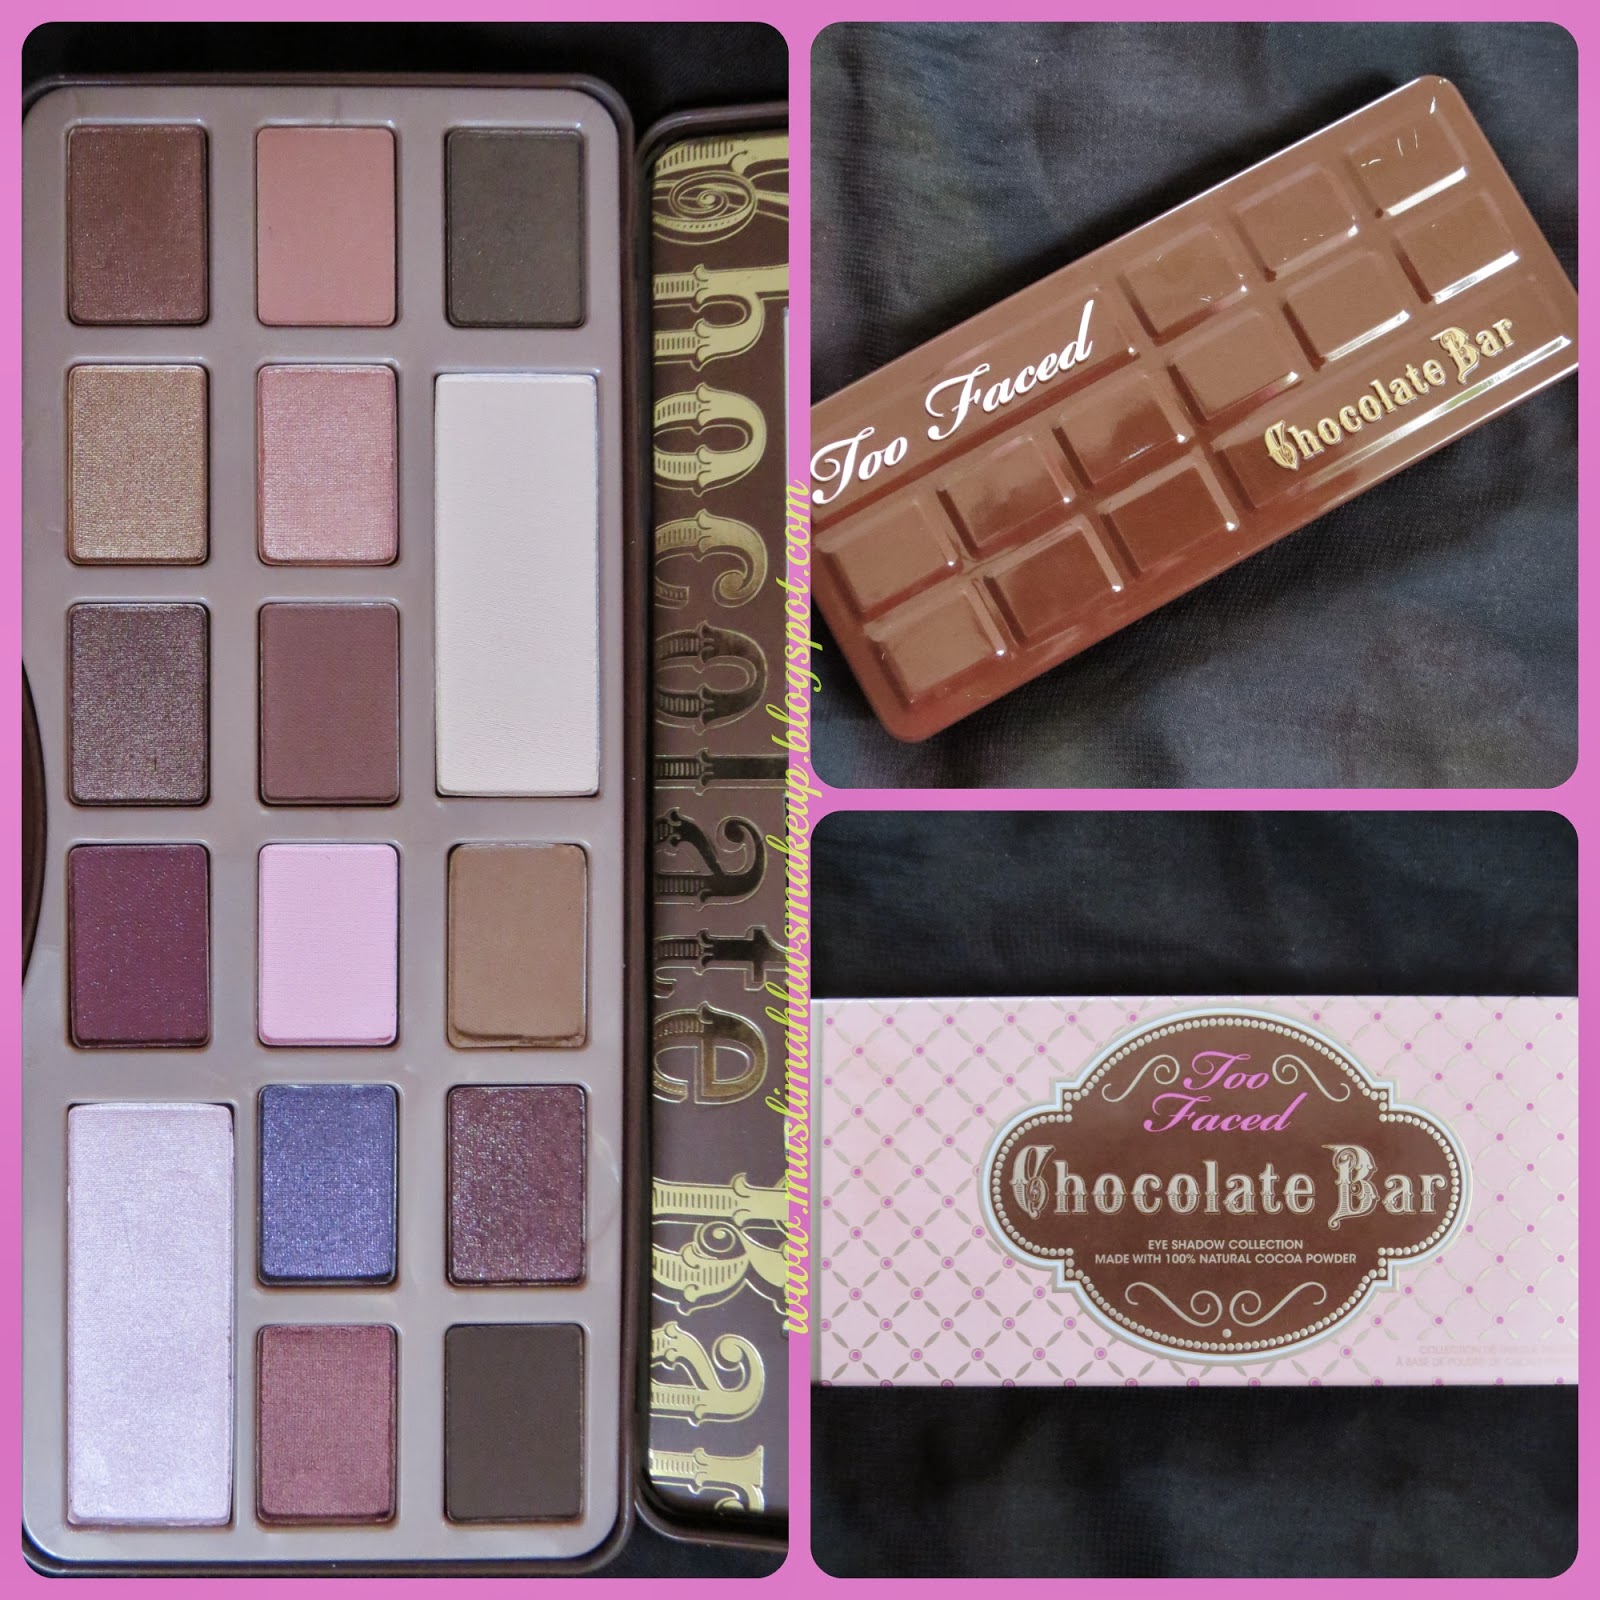 Muslimahluvsmakeup Too Faced Chocolate Bar Palette Review